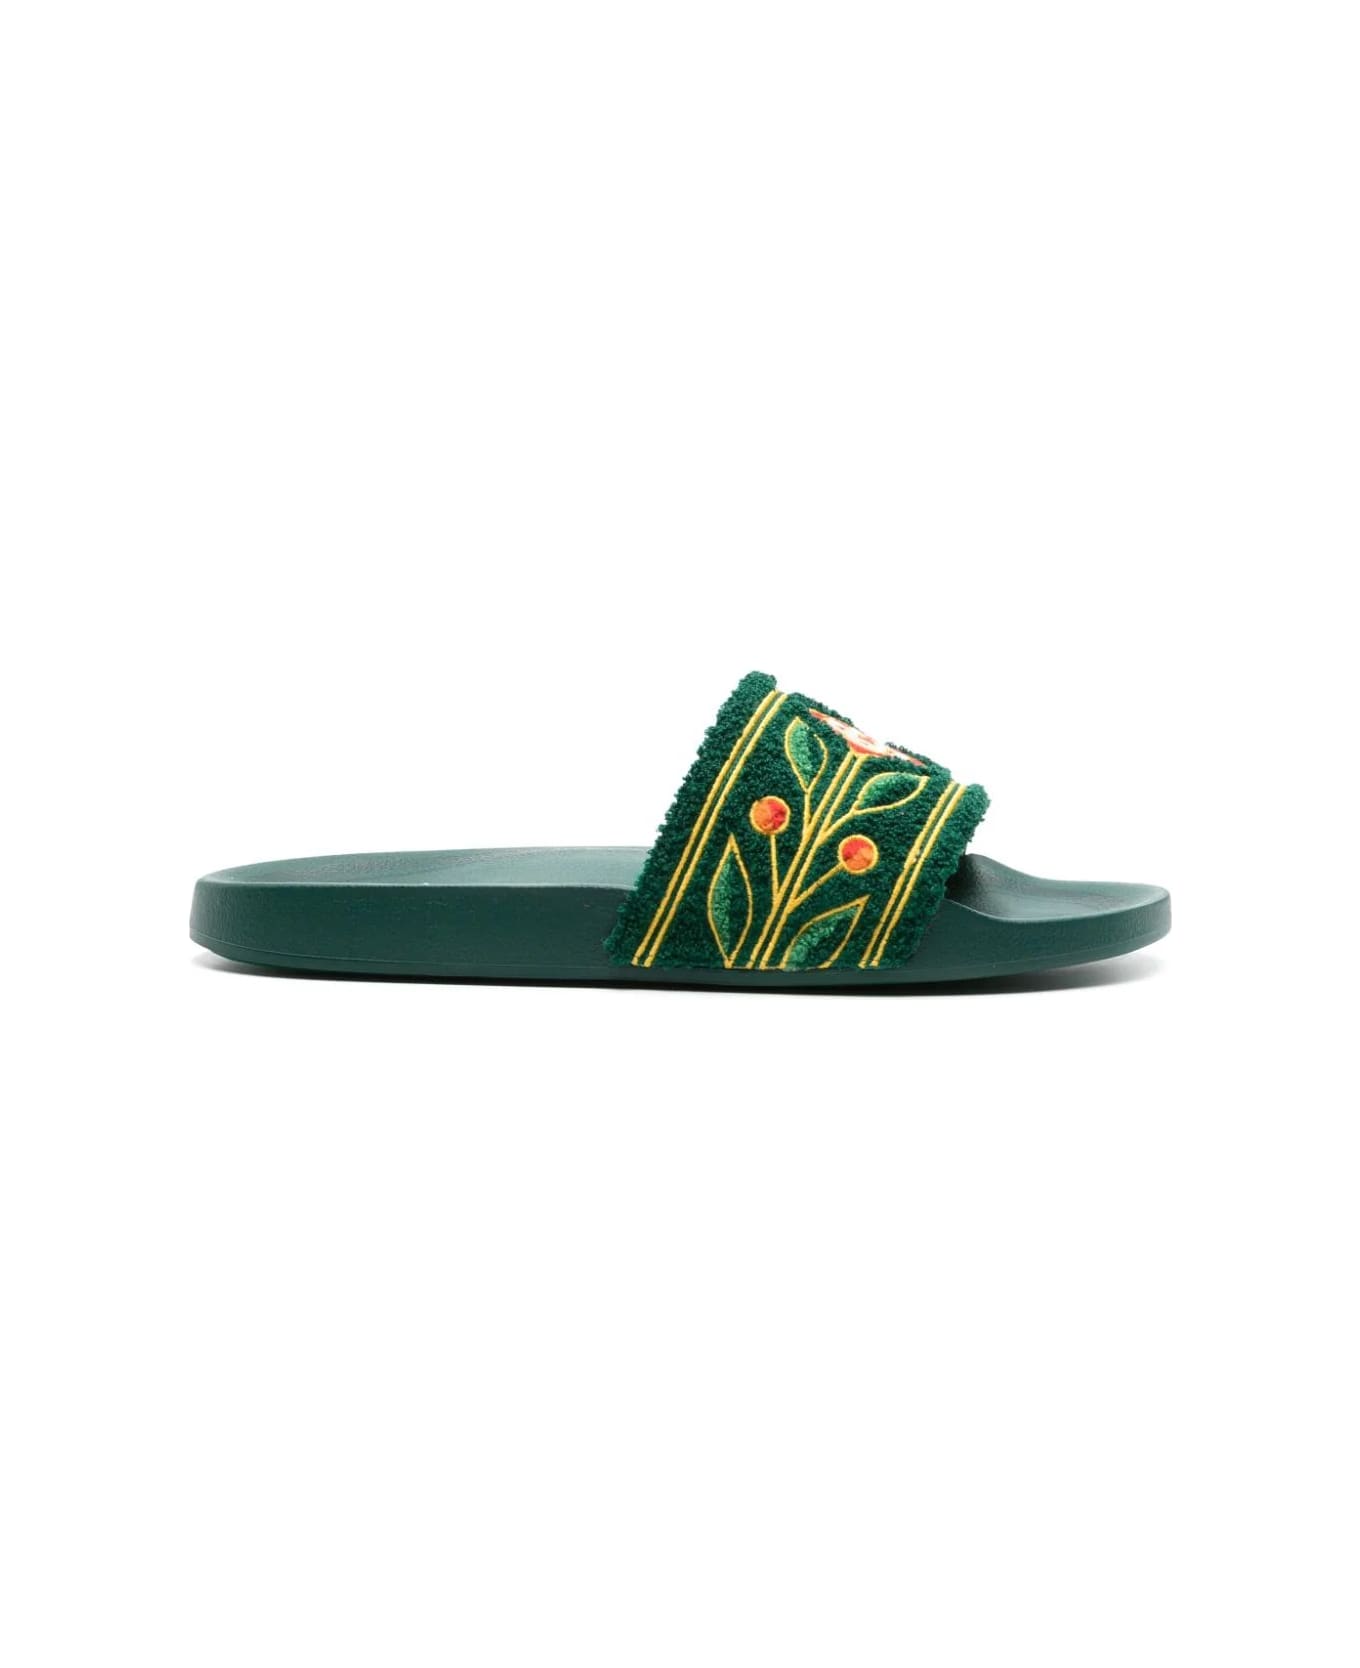 Casablanca Green Slippers With Embroidered Terry Detail - Green